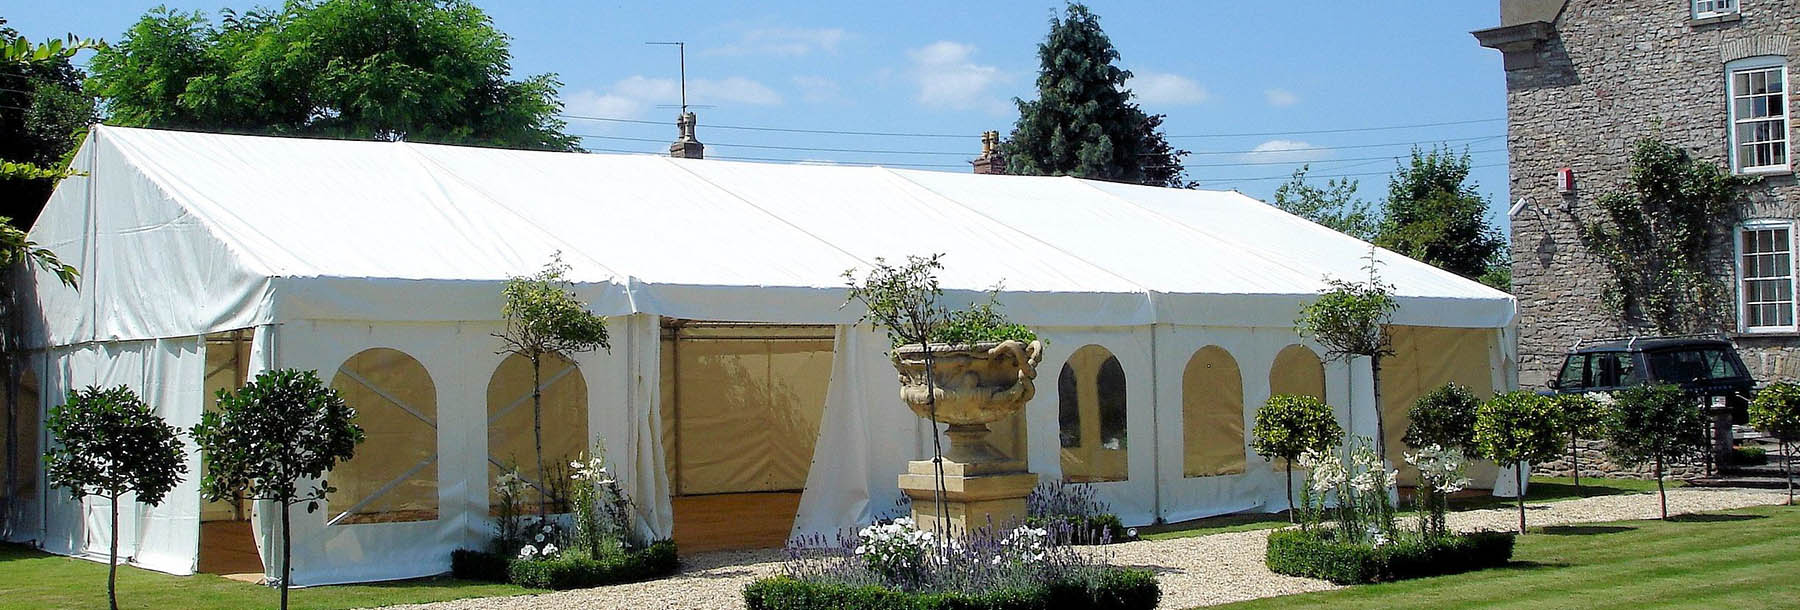 Clear Span Marquees